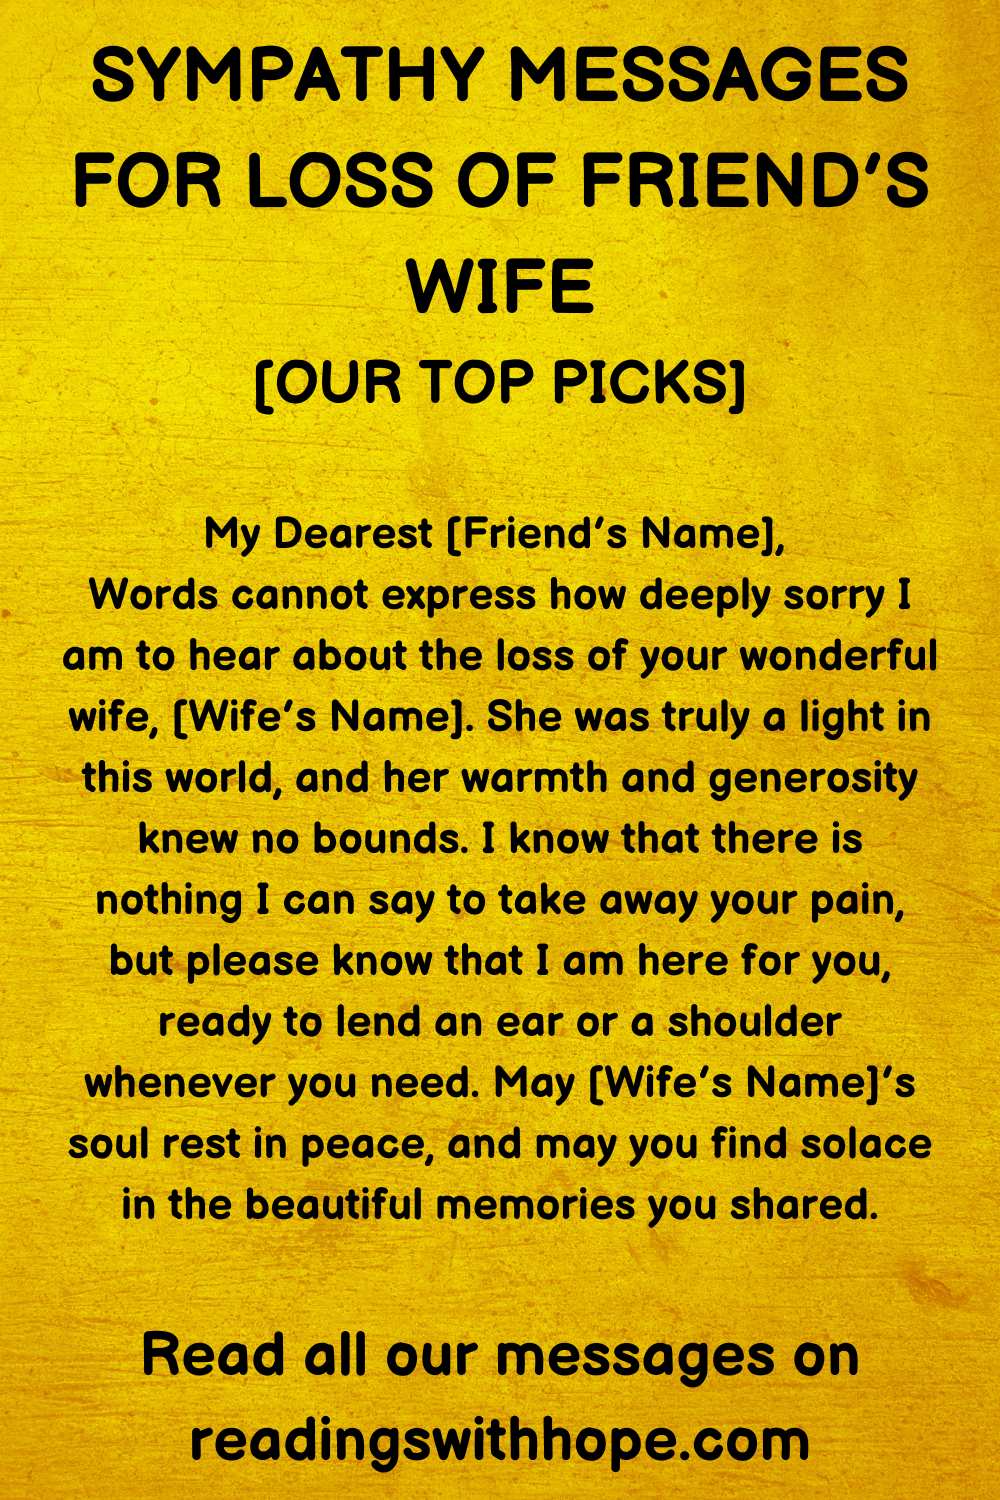 Sympathy Message for Loss of Friend's Wife